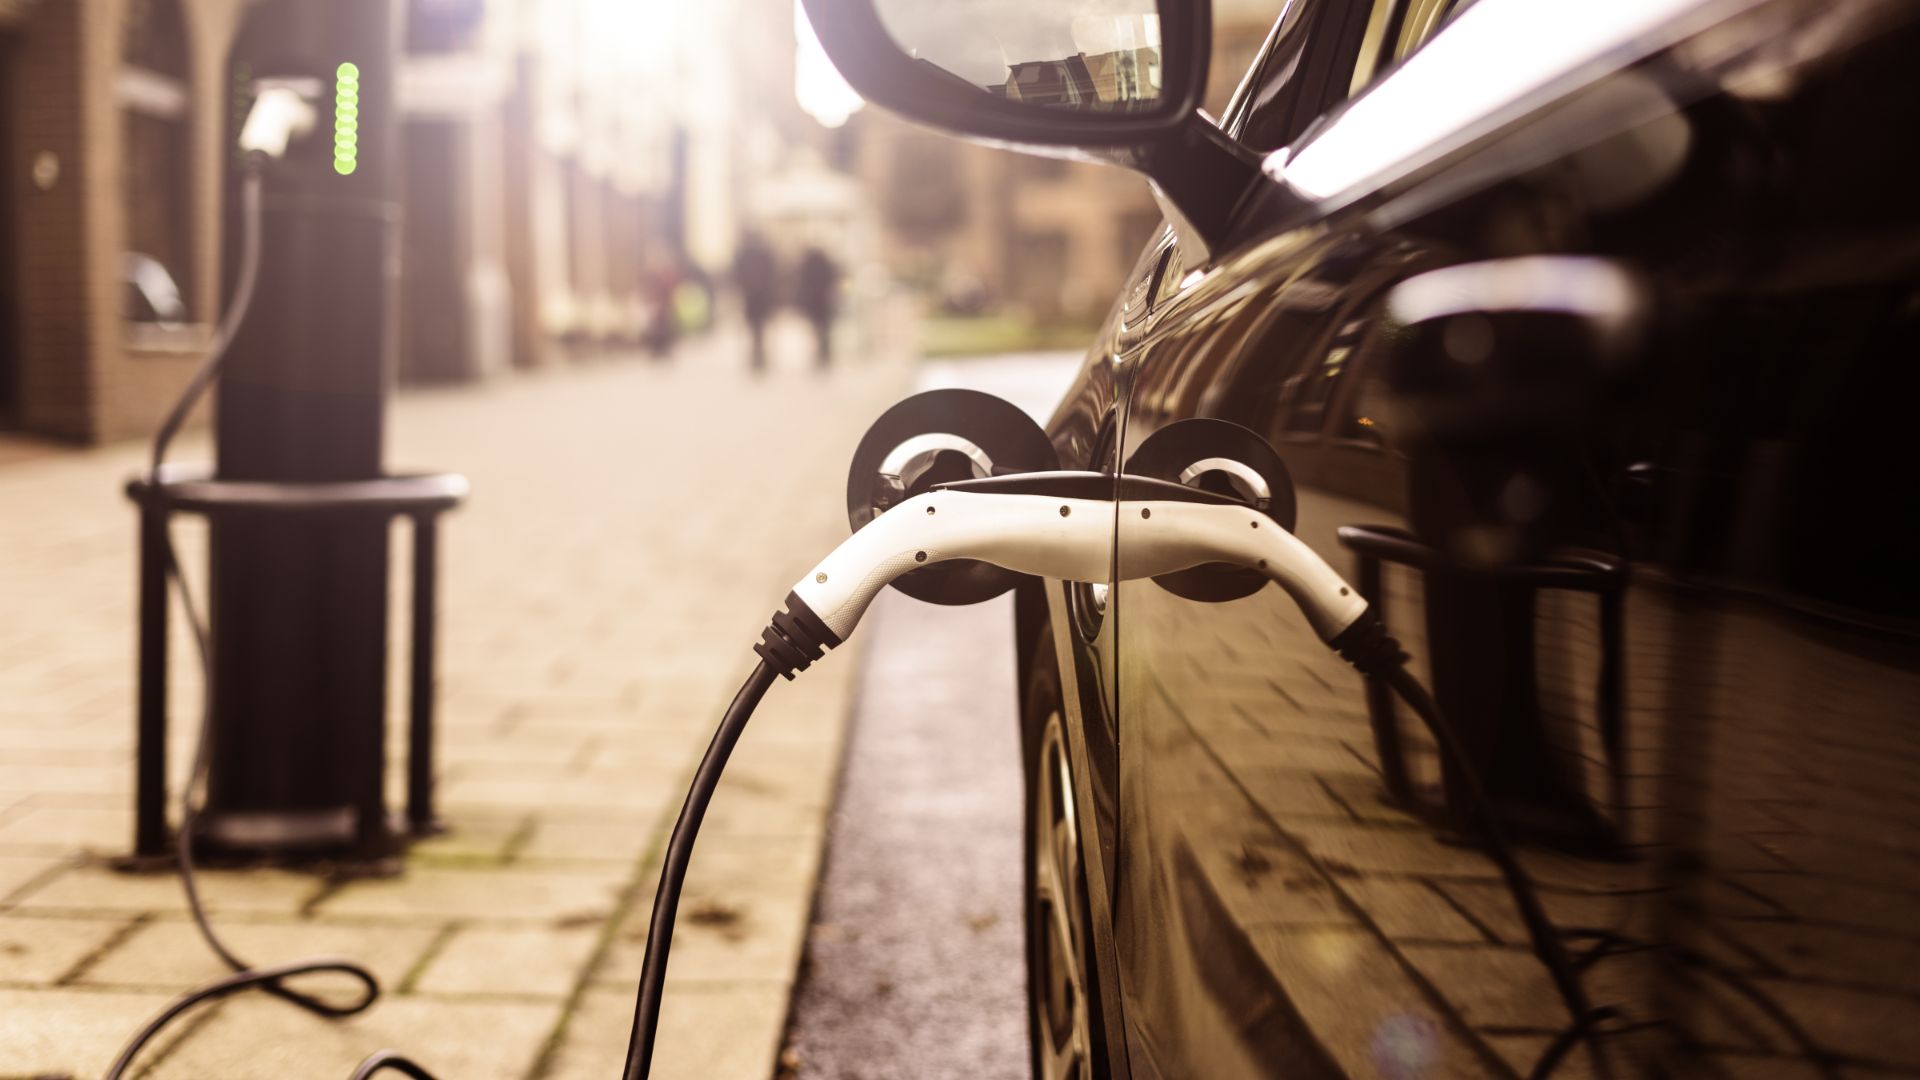 Government investment in electric car infrastructure